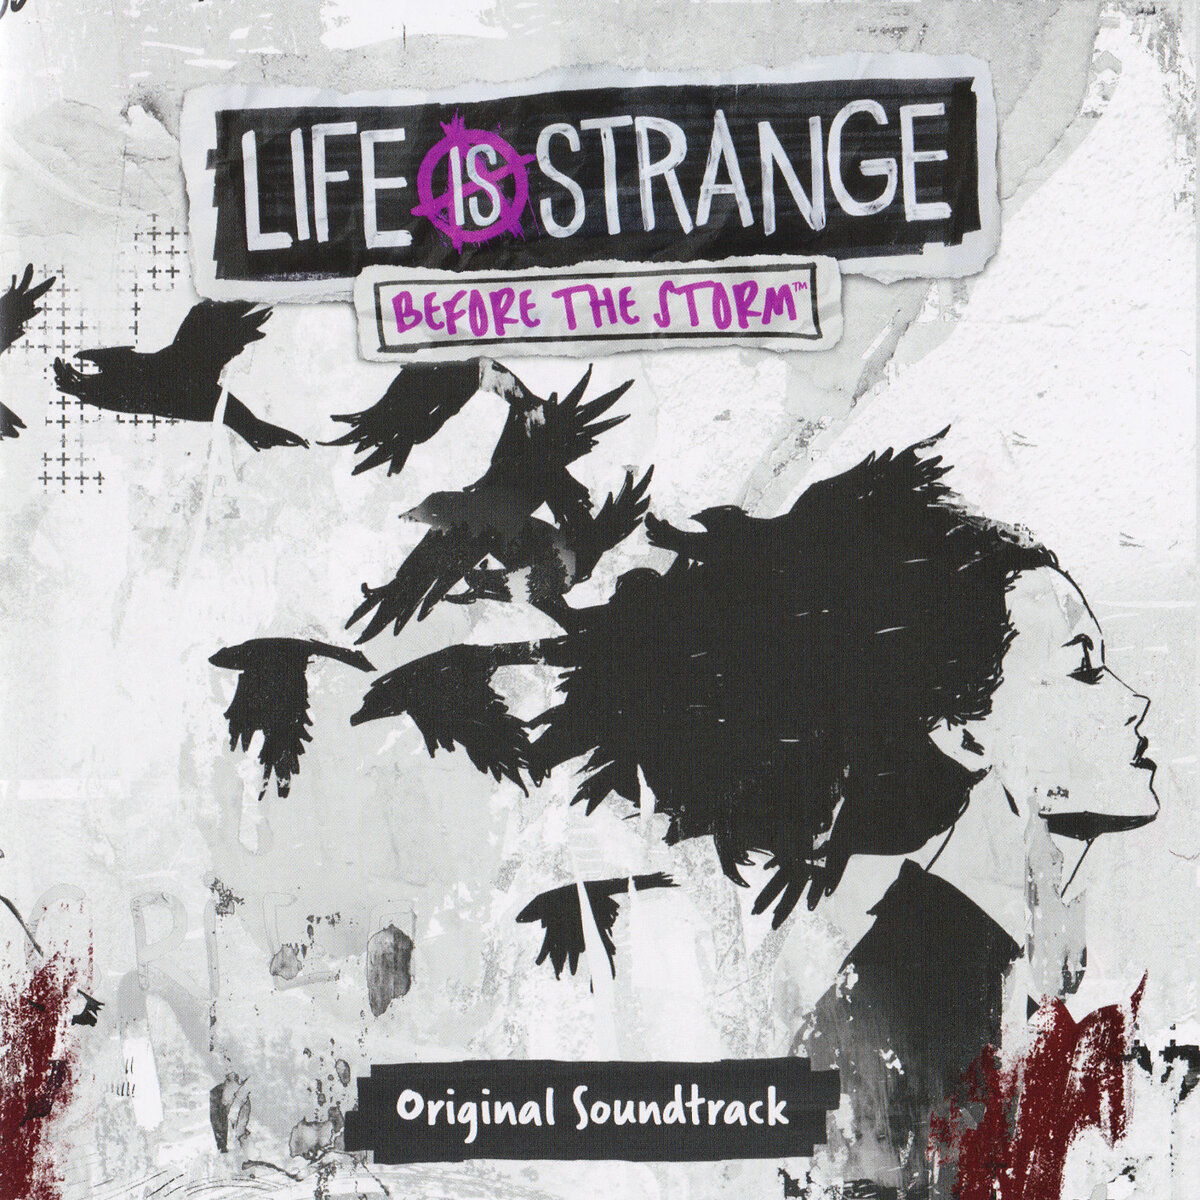 Life is various. Life is Strange: before the Storm. Life is Strange before the Storm диск. Life is Strange before the Storm Limited Edition. Life is Strange before the Storm обложка.